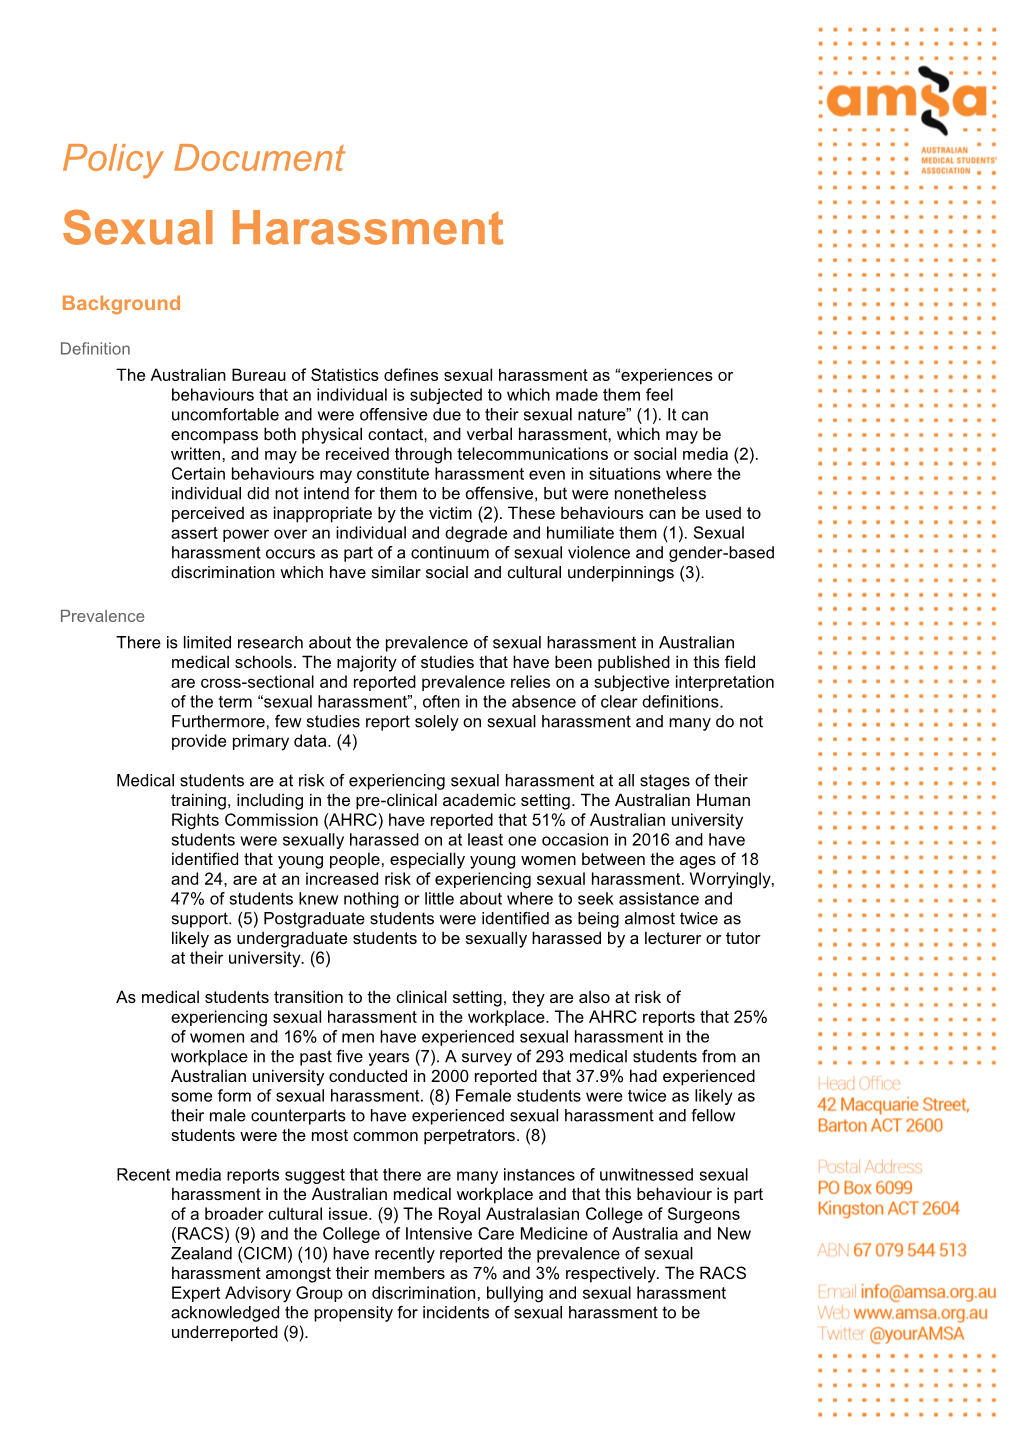 Policy Document Sexual Harassment